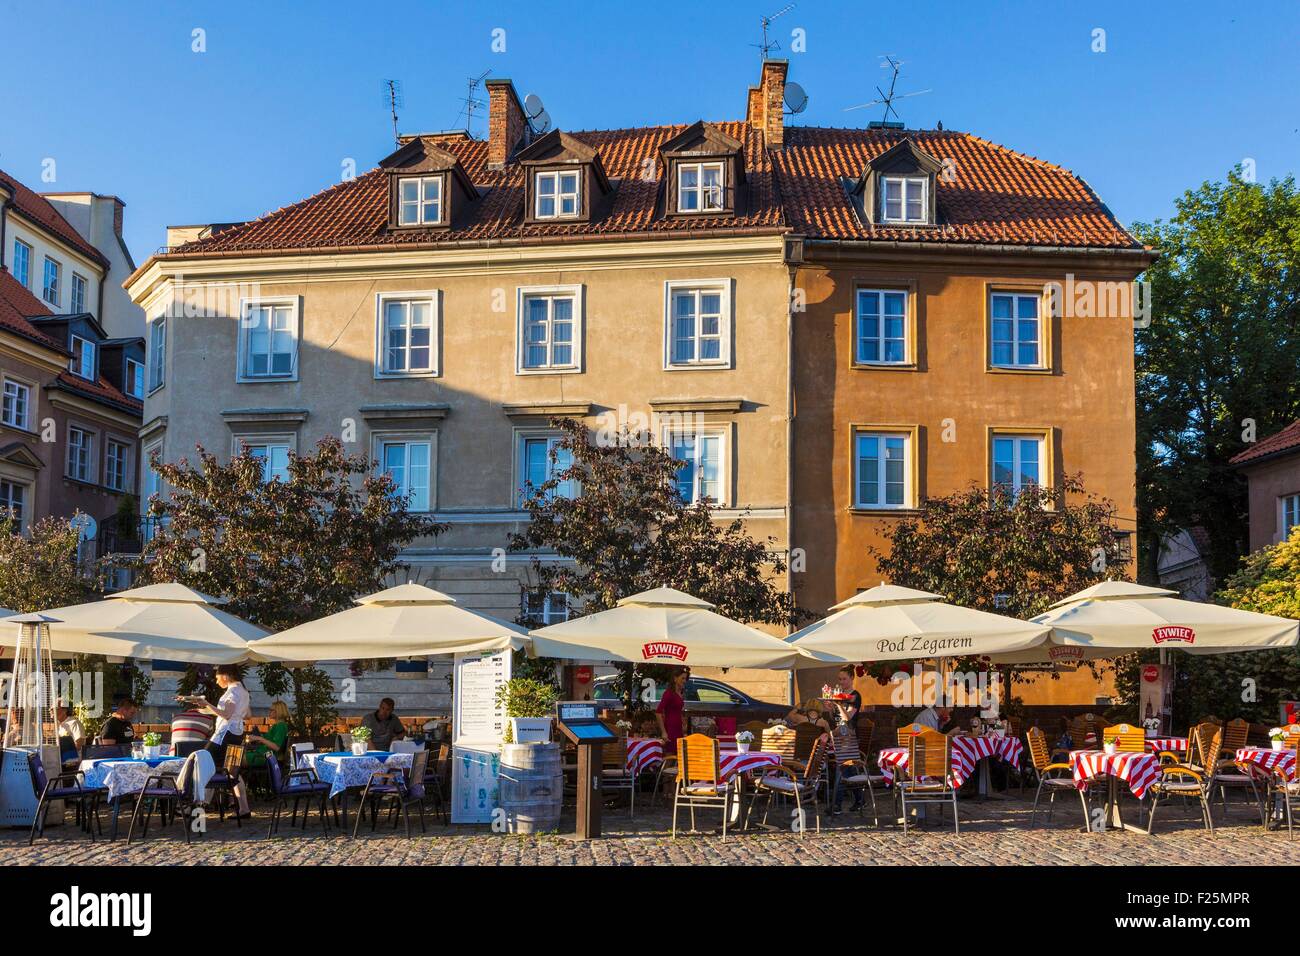 Poland, Mazovia region, Warsaw, district of Stare Miasto, Old Town listed as World Heritage by UNESCO Stock Photo